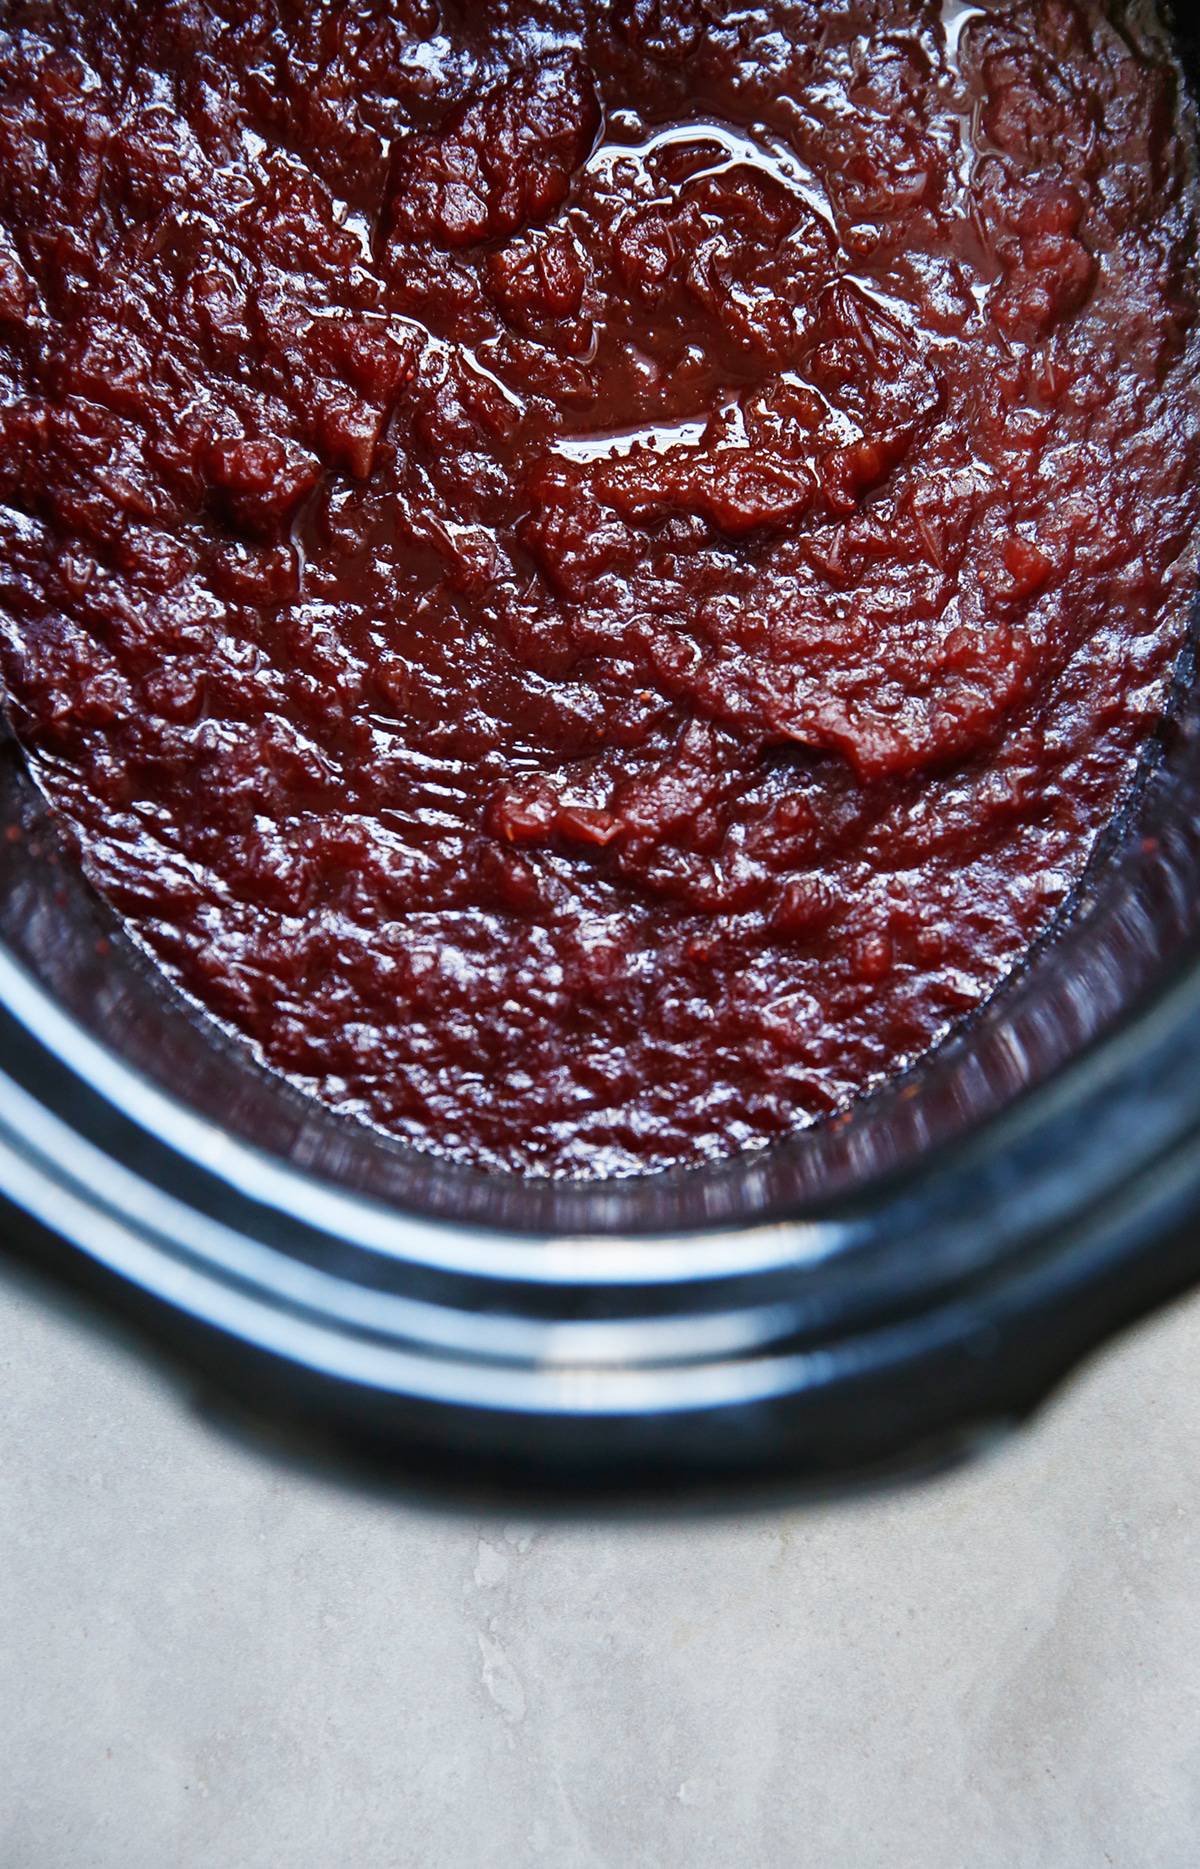 Slow cooker cranberry sauce